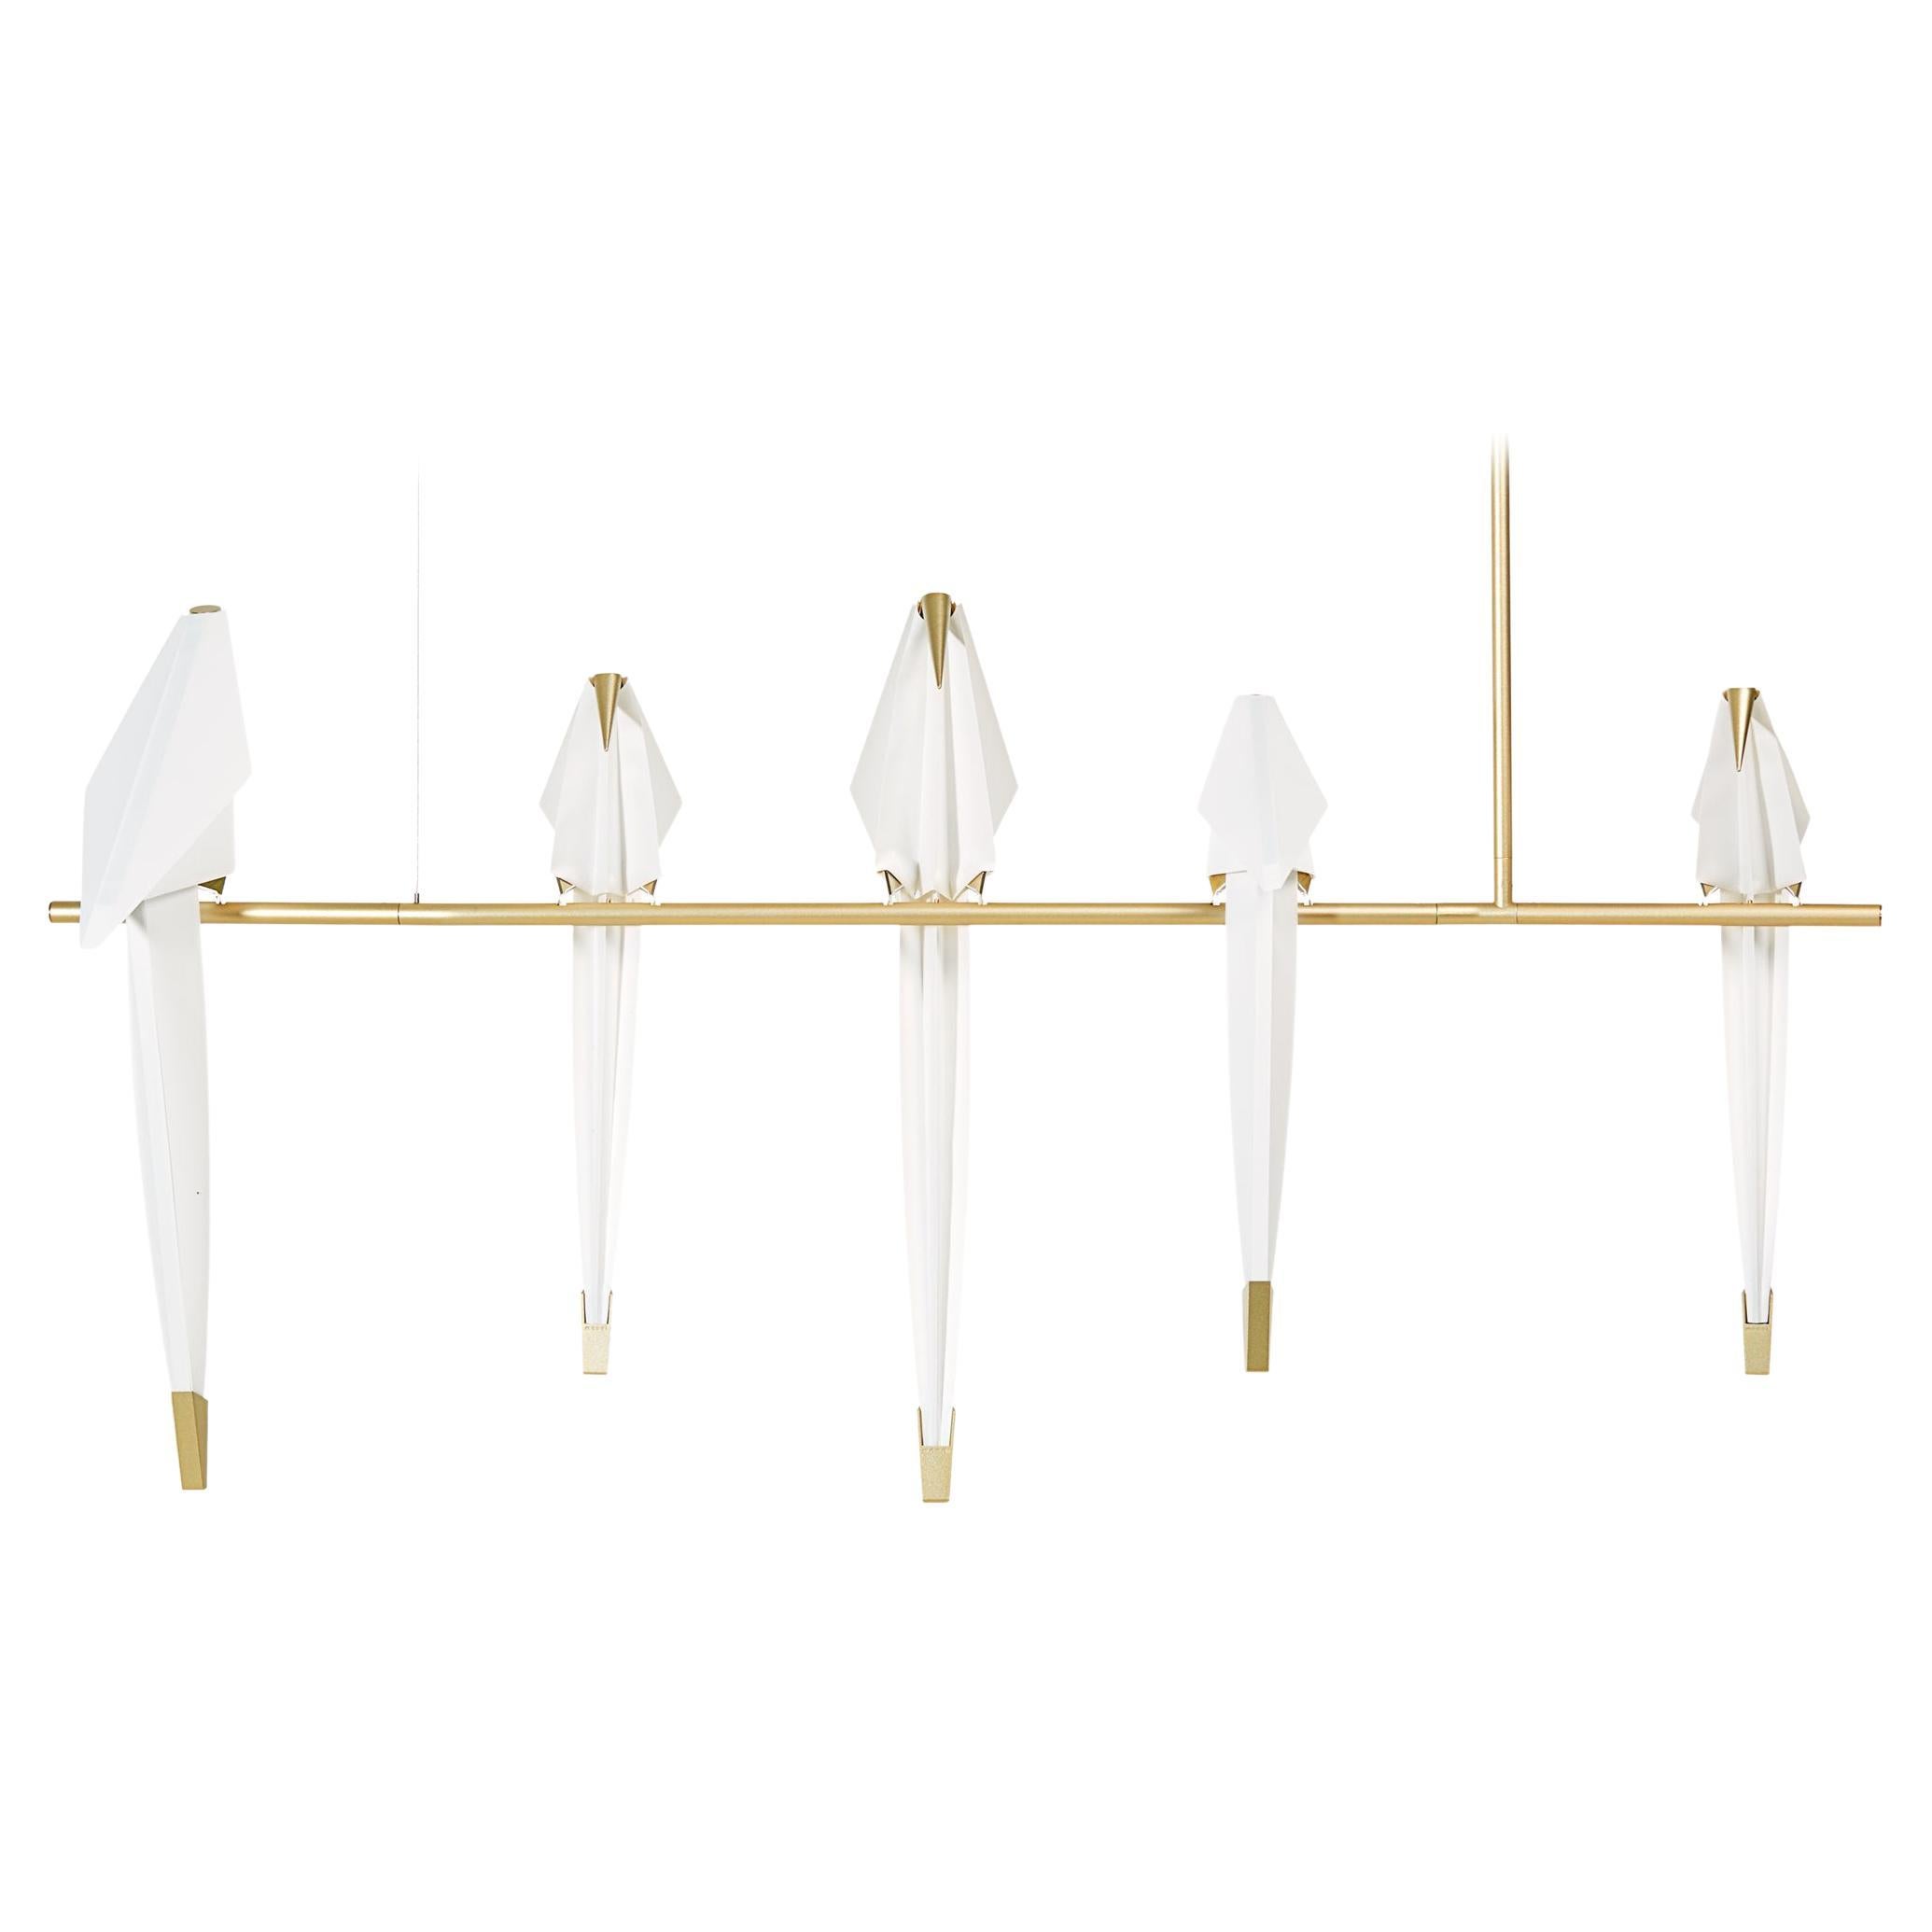 Moooi Perch Branch Small Suspension Light in Steel and Aluminium Frame